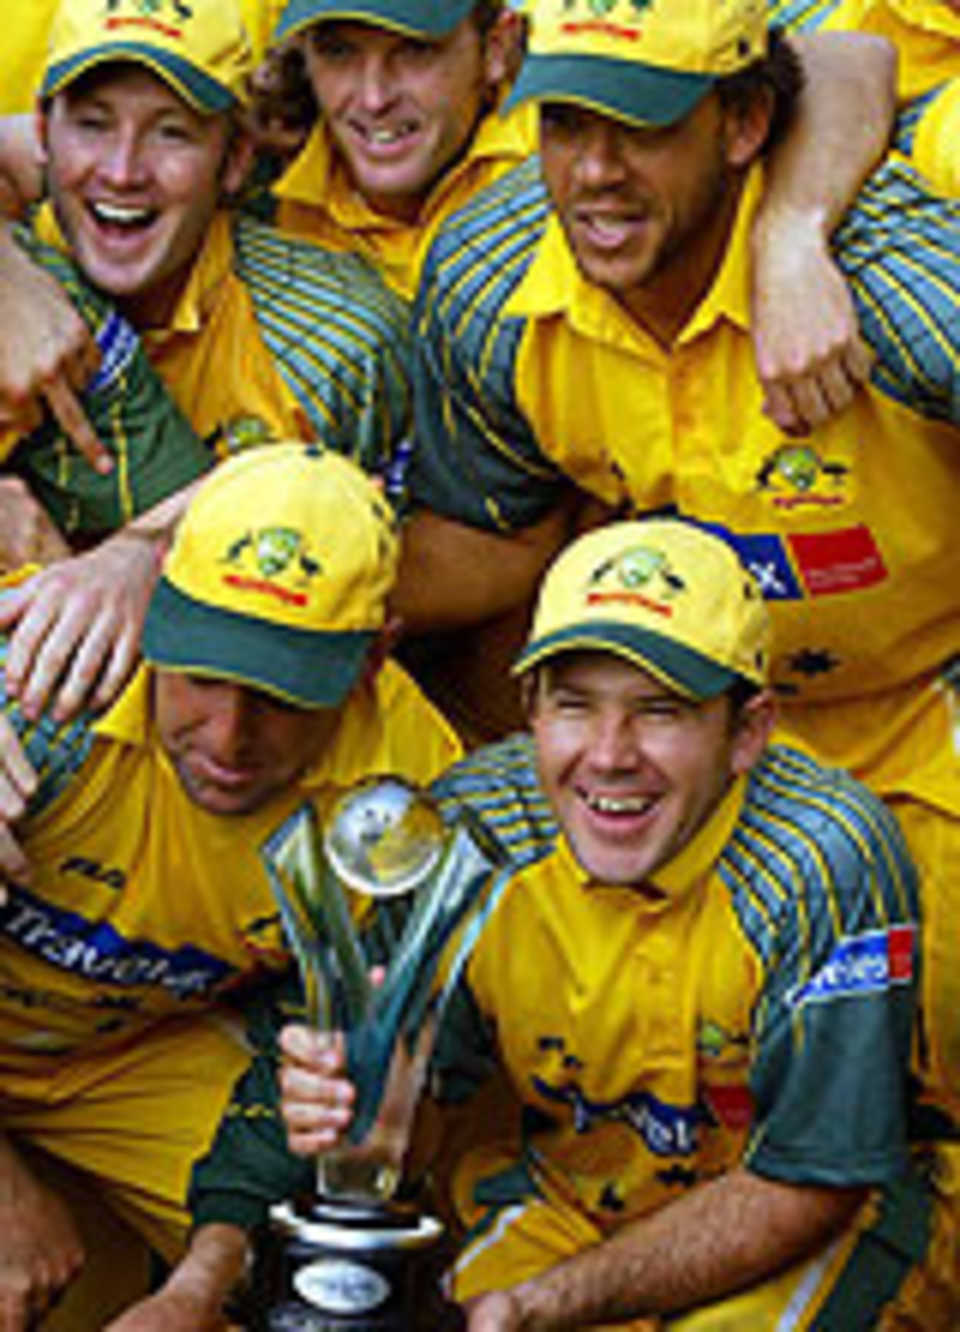 The Australian team with the Videocon Cup